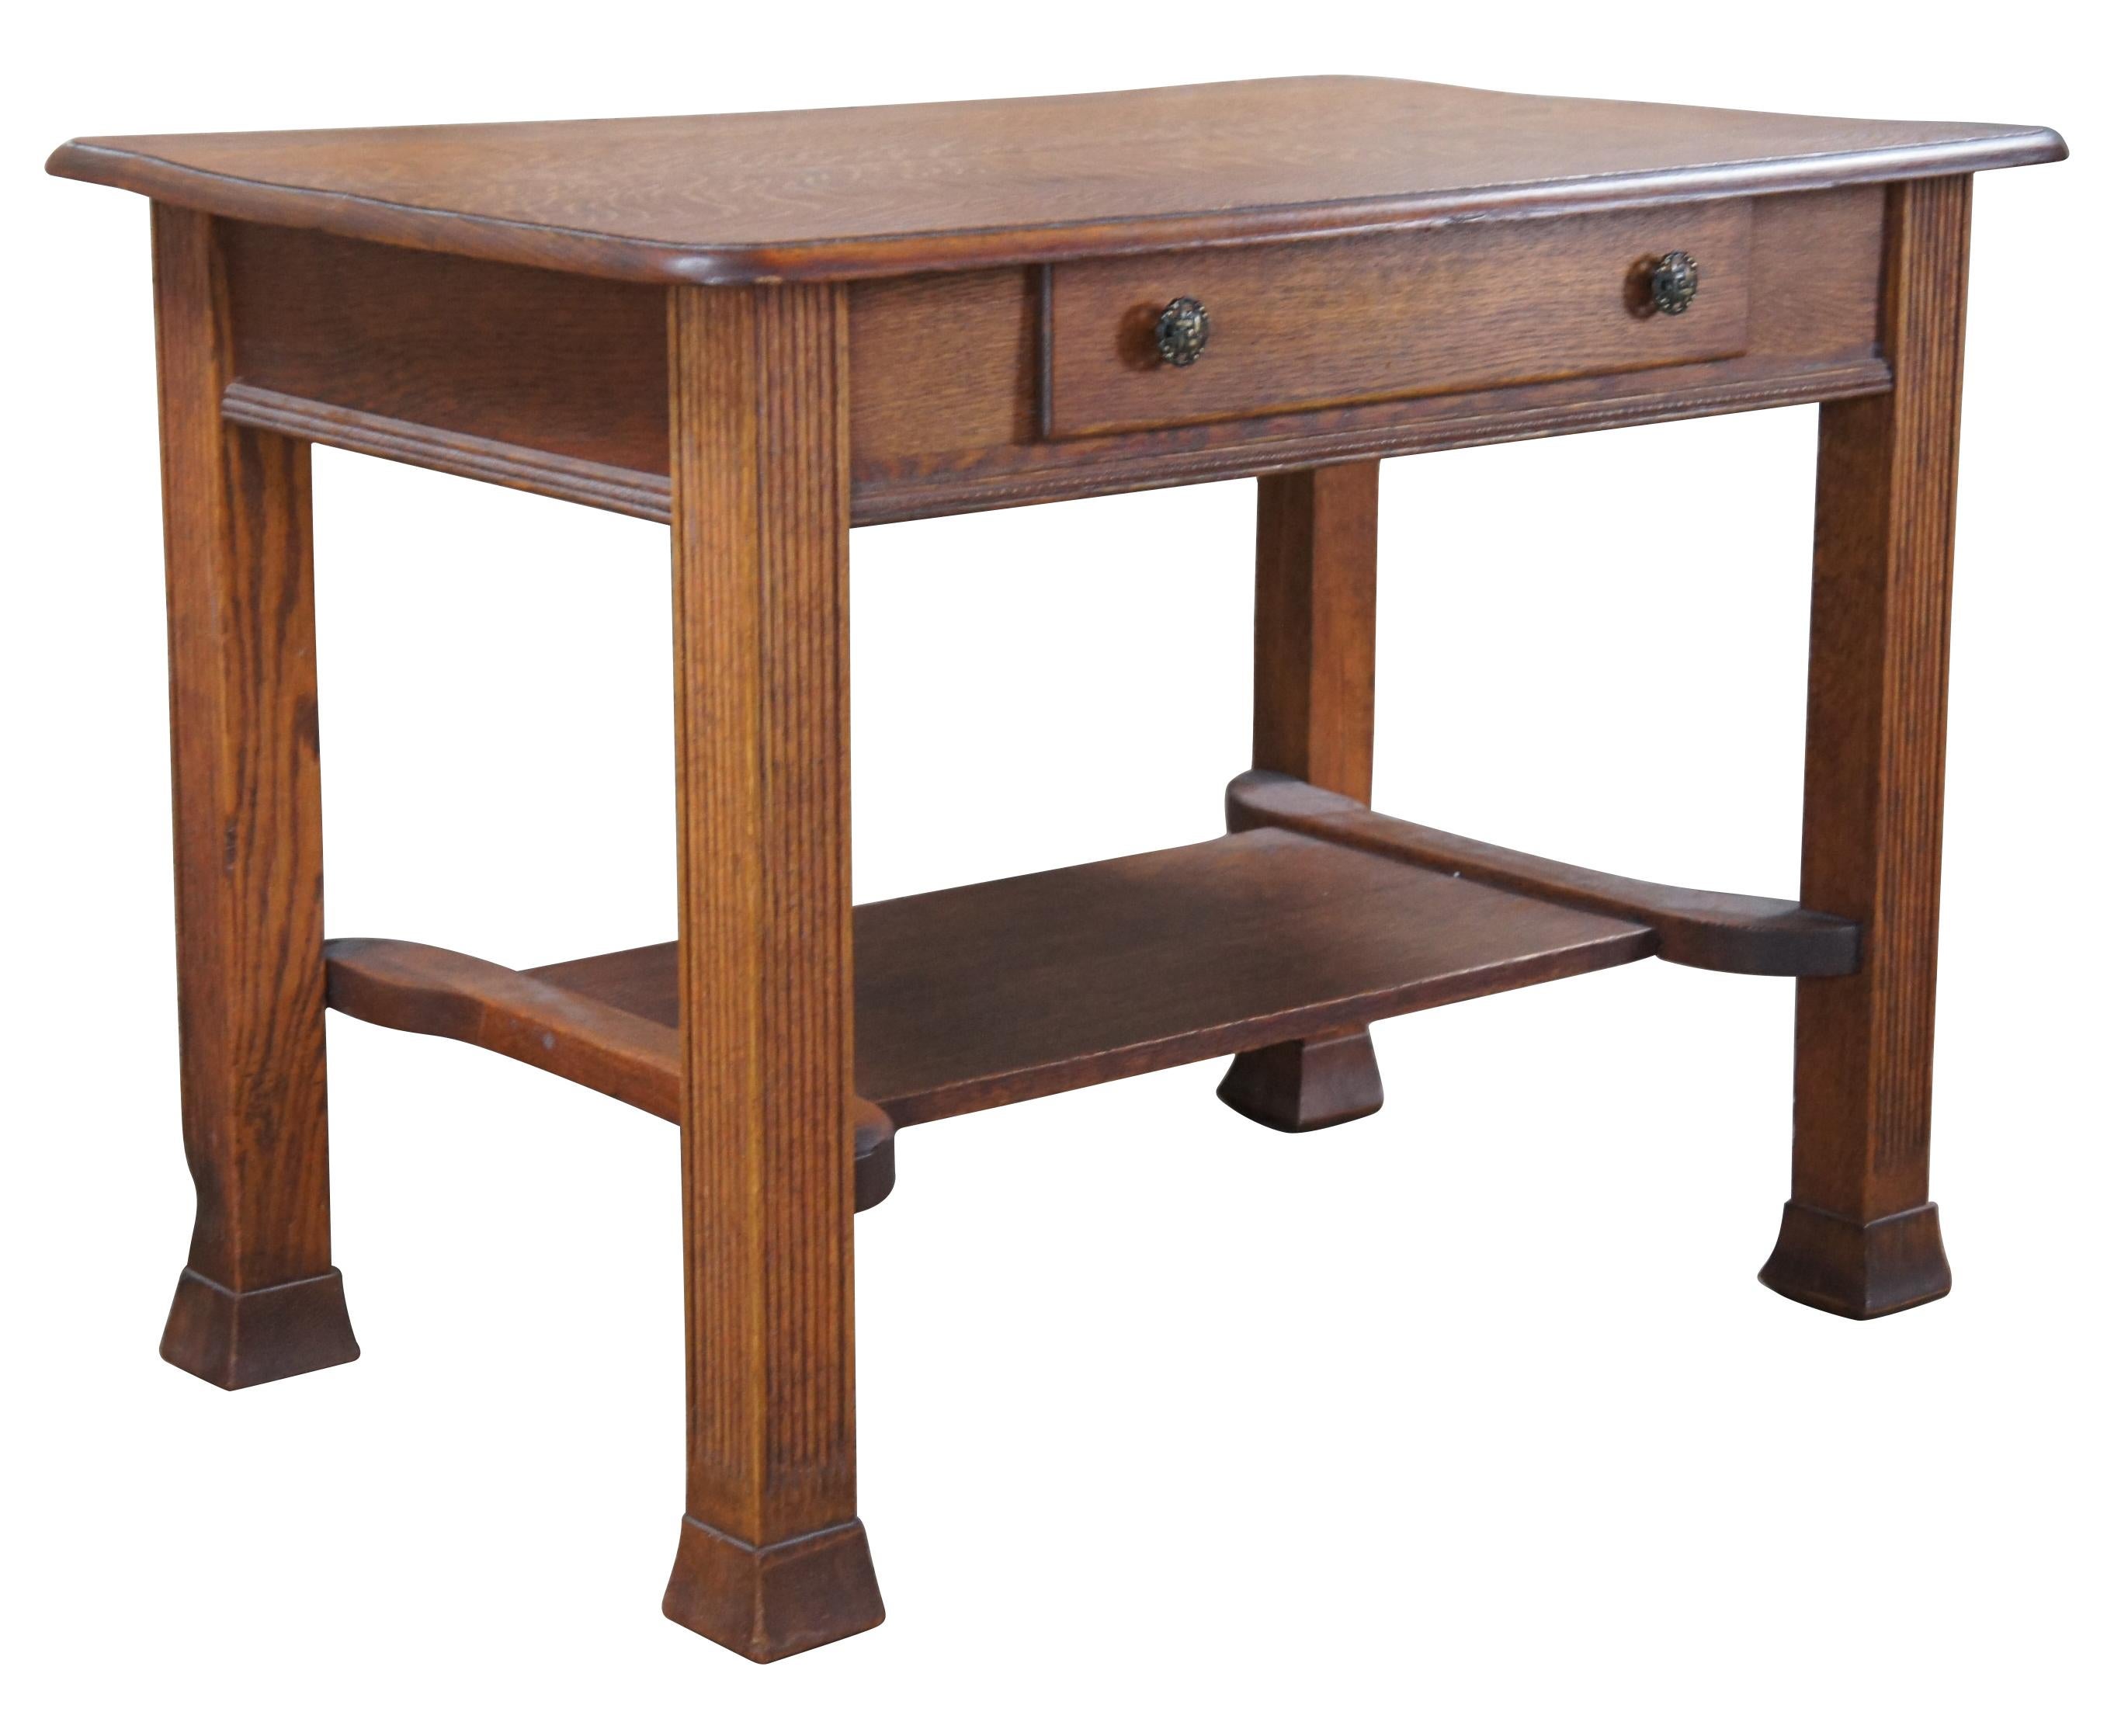 A beautiful early 20th century oak desk. Features a rectangular frame with central dovetailed drawer accented by brass filigree hardware over an egg and drat carved molding.  The desk is supported by square fluted legs leading to flared feet.  A